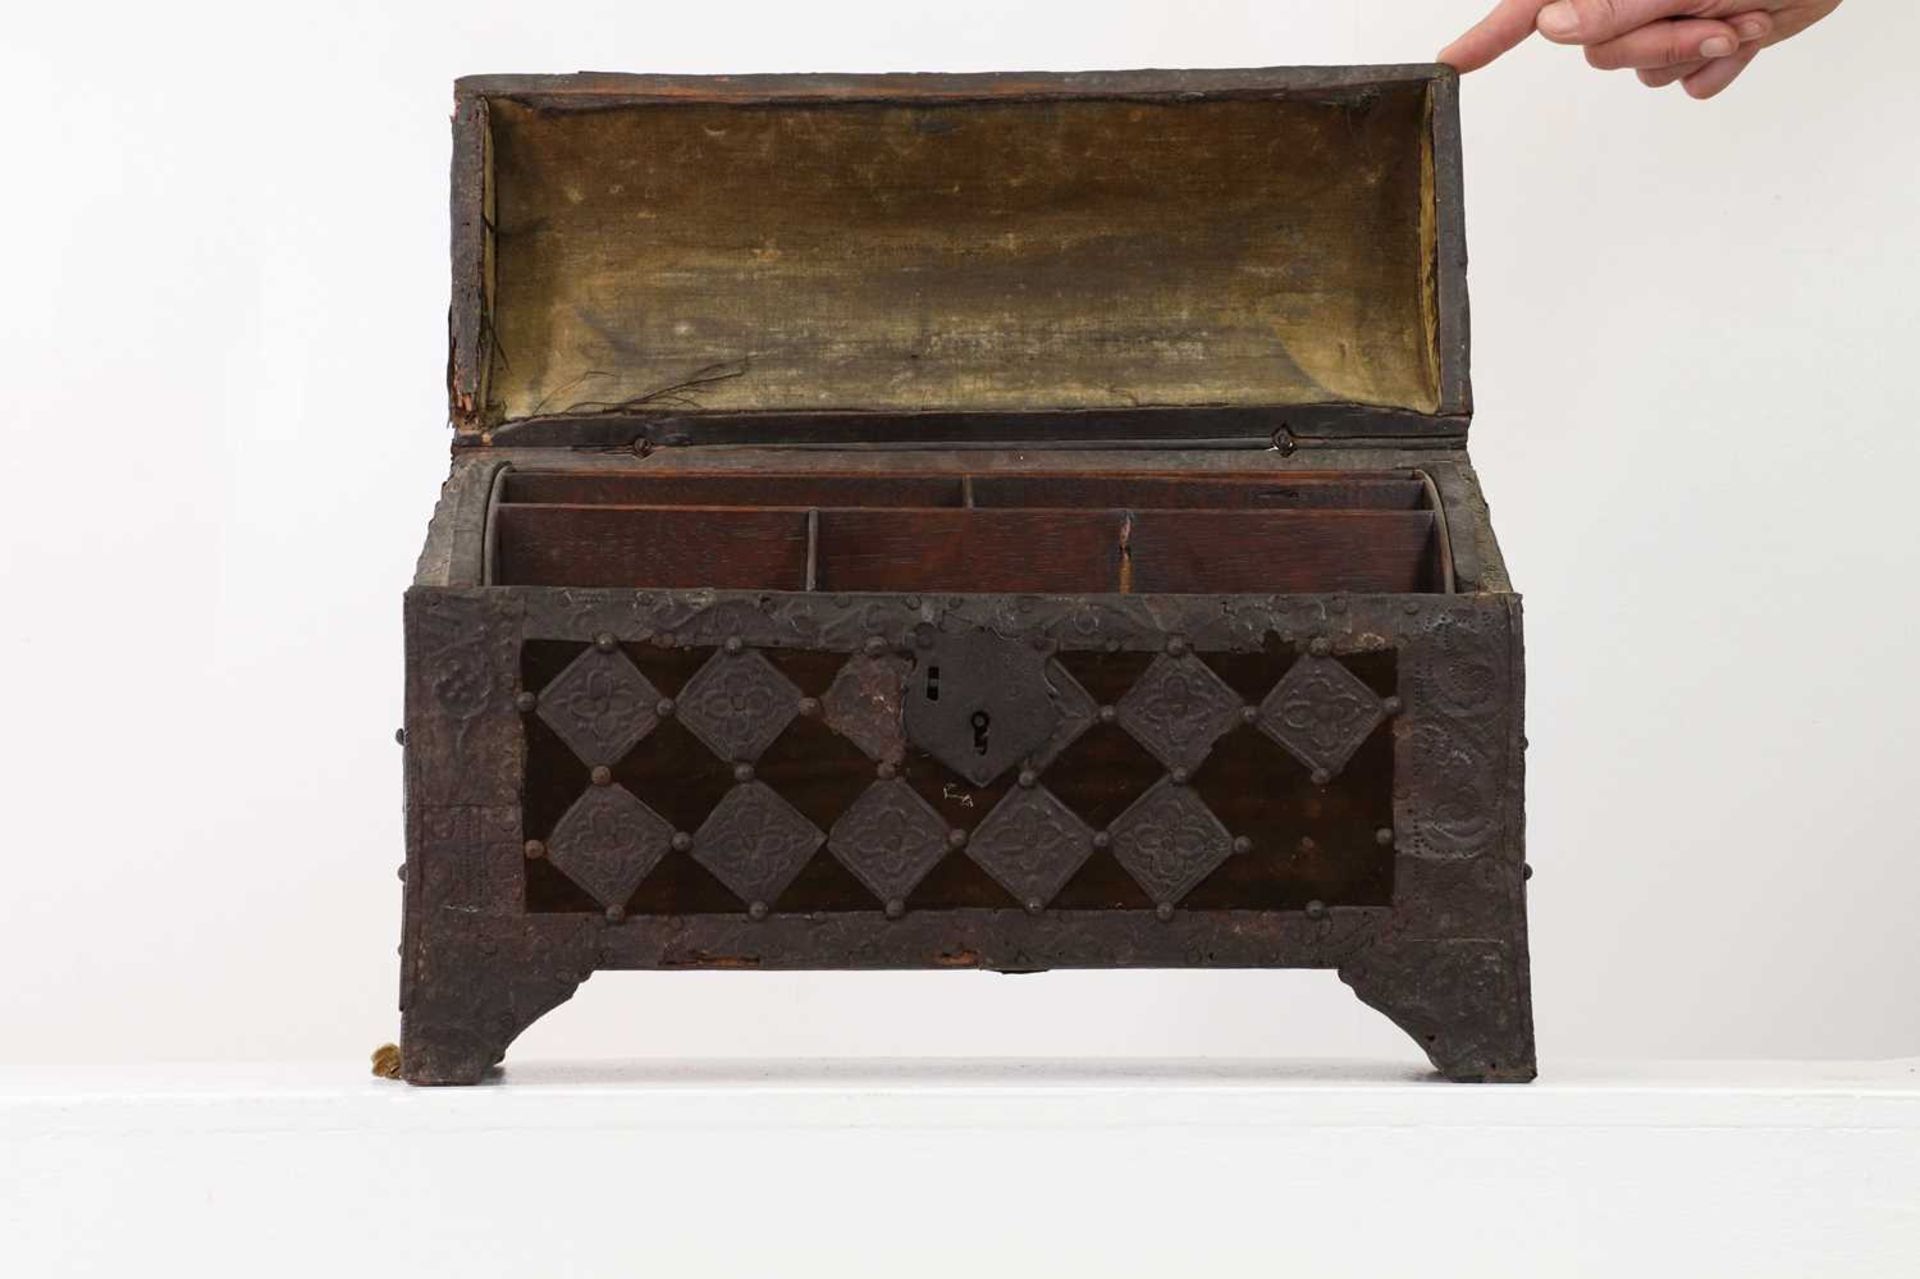 A studded metal-clad table casket, - Image 6 of 7